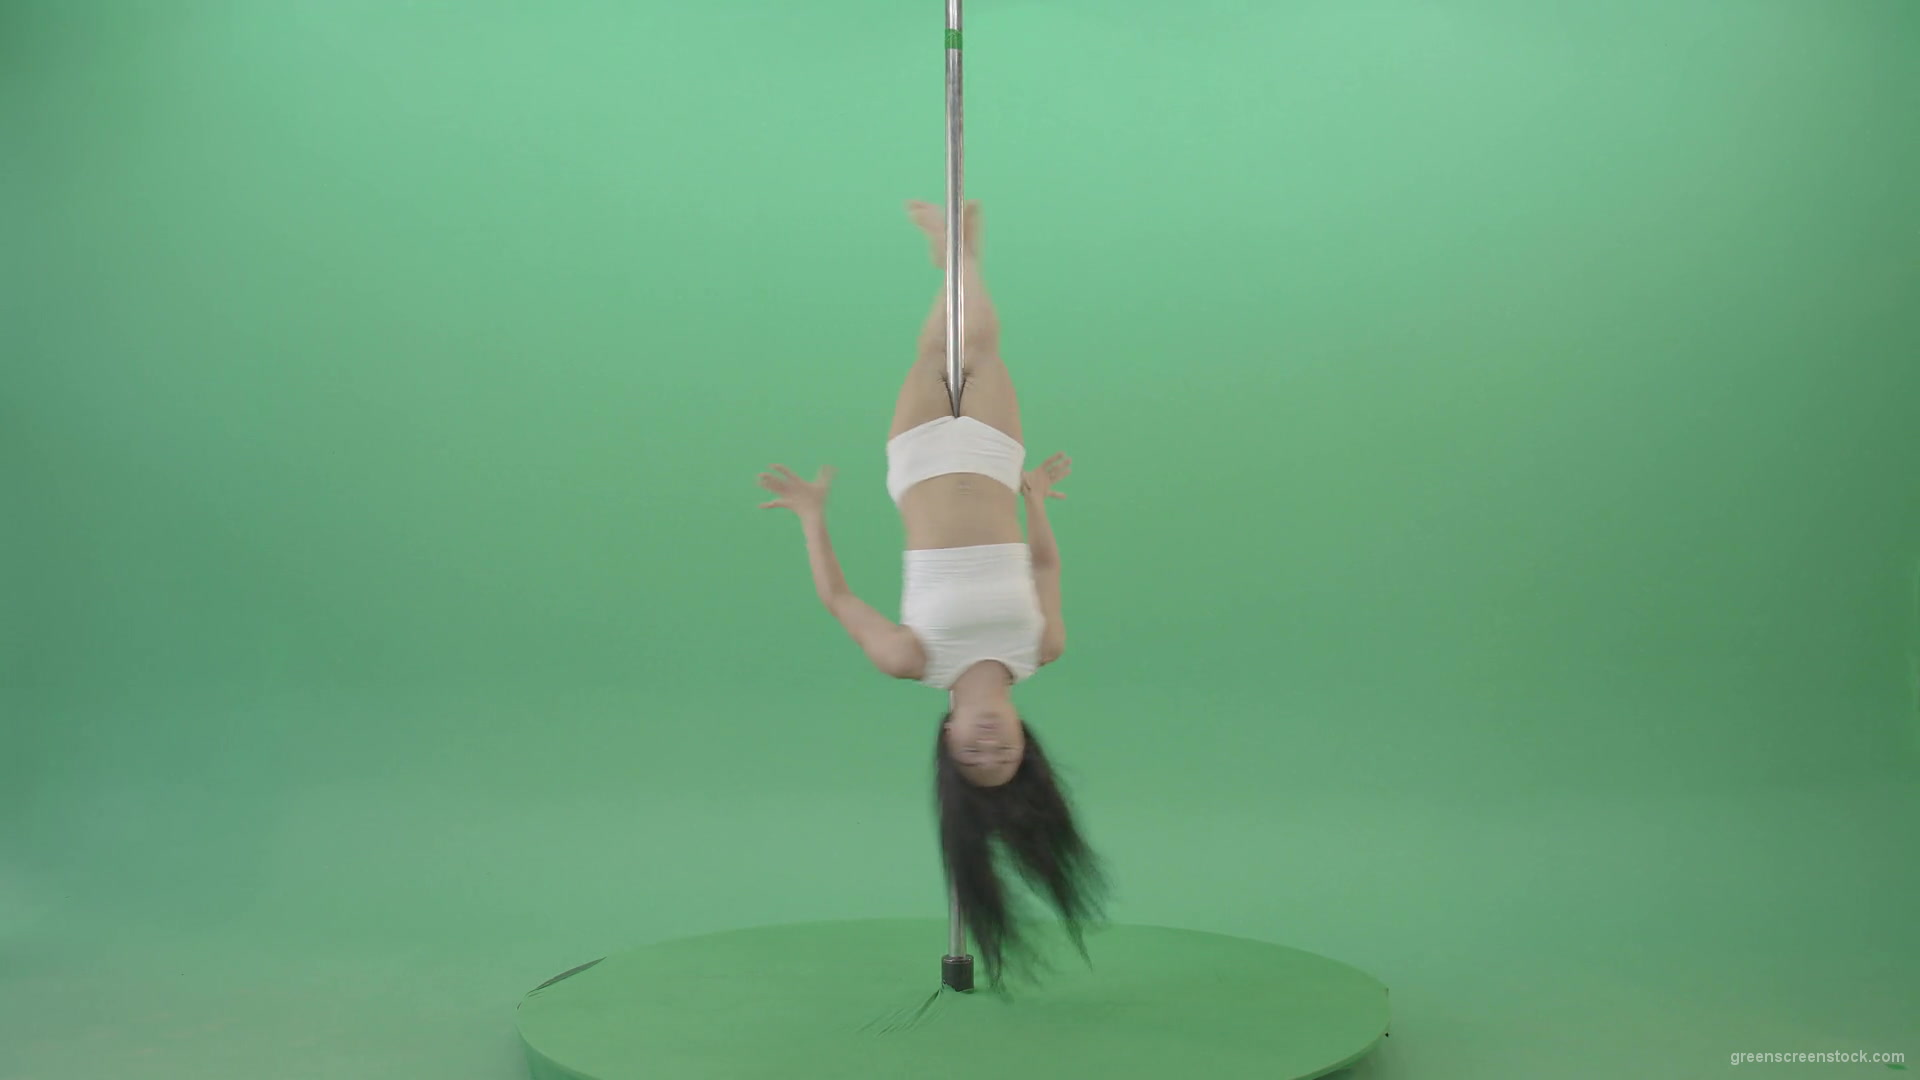 Dark-Hair-Girl-in-White-body-dress-underwear-spinning-on-the-pilon-showing-exotic-dance-over-green-screen-4K-Video-Footage-1920_006 Green Screen Stock